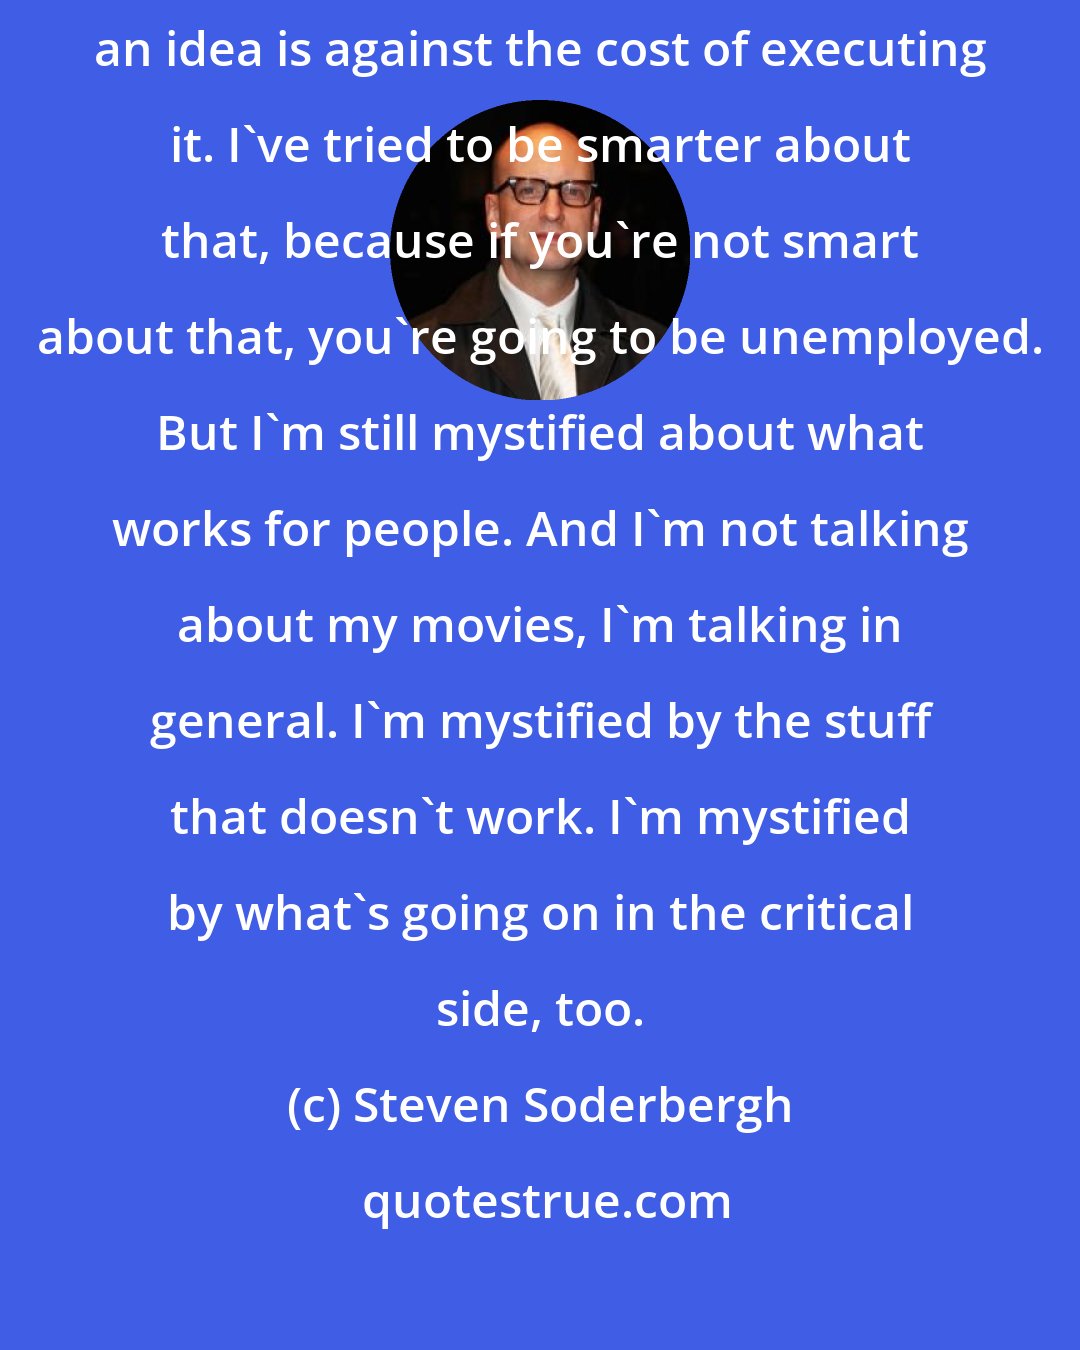 Steven Soderbergh: I've tried to get better about weighing what I think the accessibility of an idea is against the cost of executing it. I've tried to be smarter about that, because if you're not smart about that, you're going to be unemployed. But I'm still mystified about what works for people. And I'm not talking about my movies, I'm talking in general. I'm mystified by the stuff that doesn't work. I'm mystified by what's going on in the critical side, too.